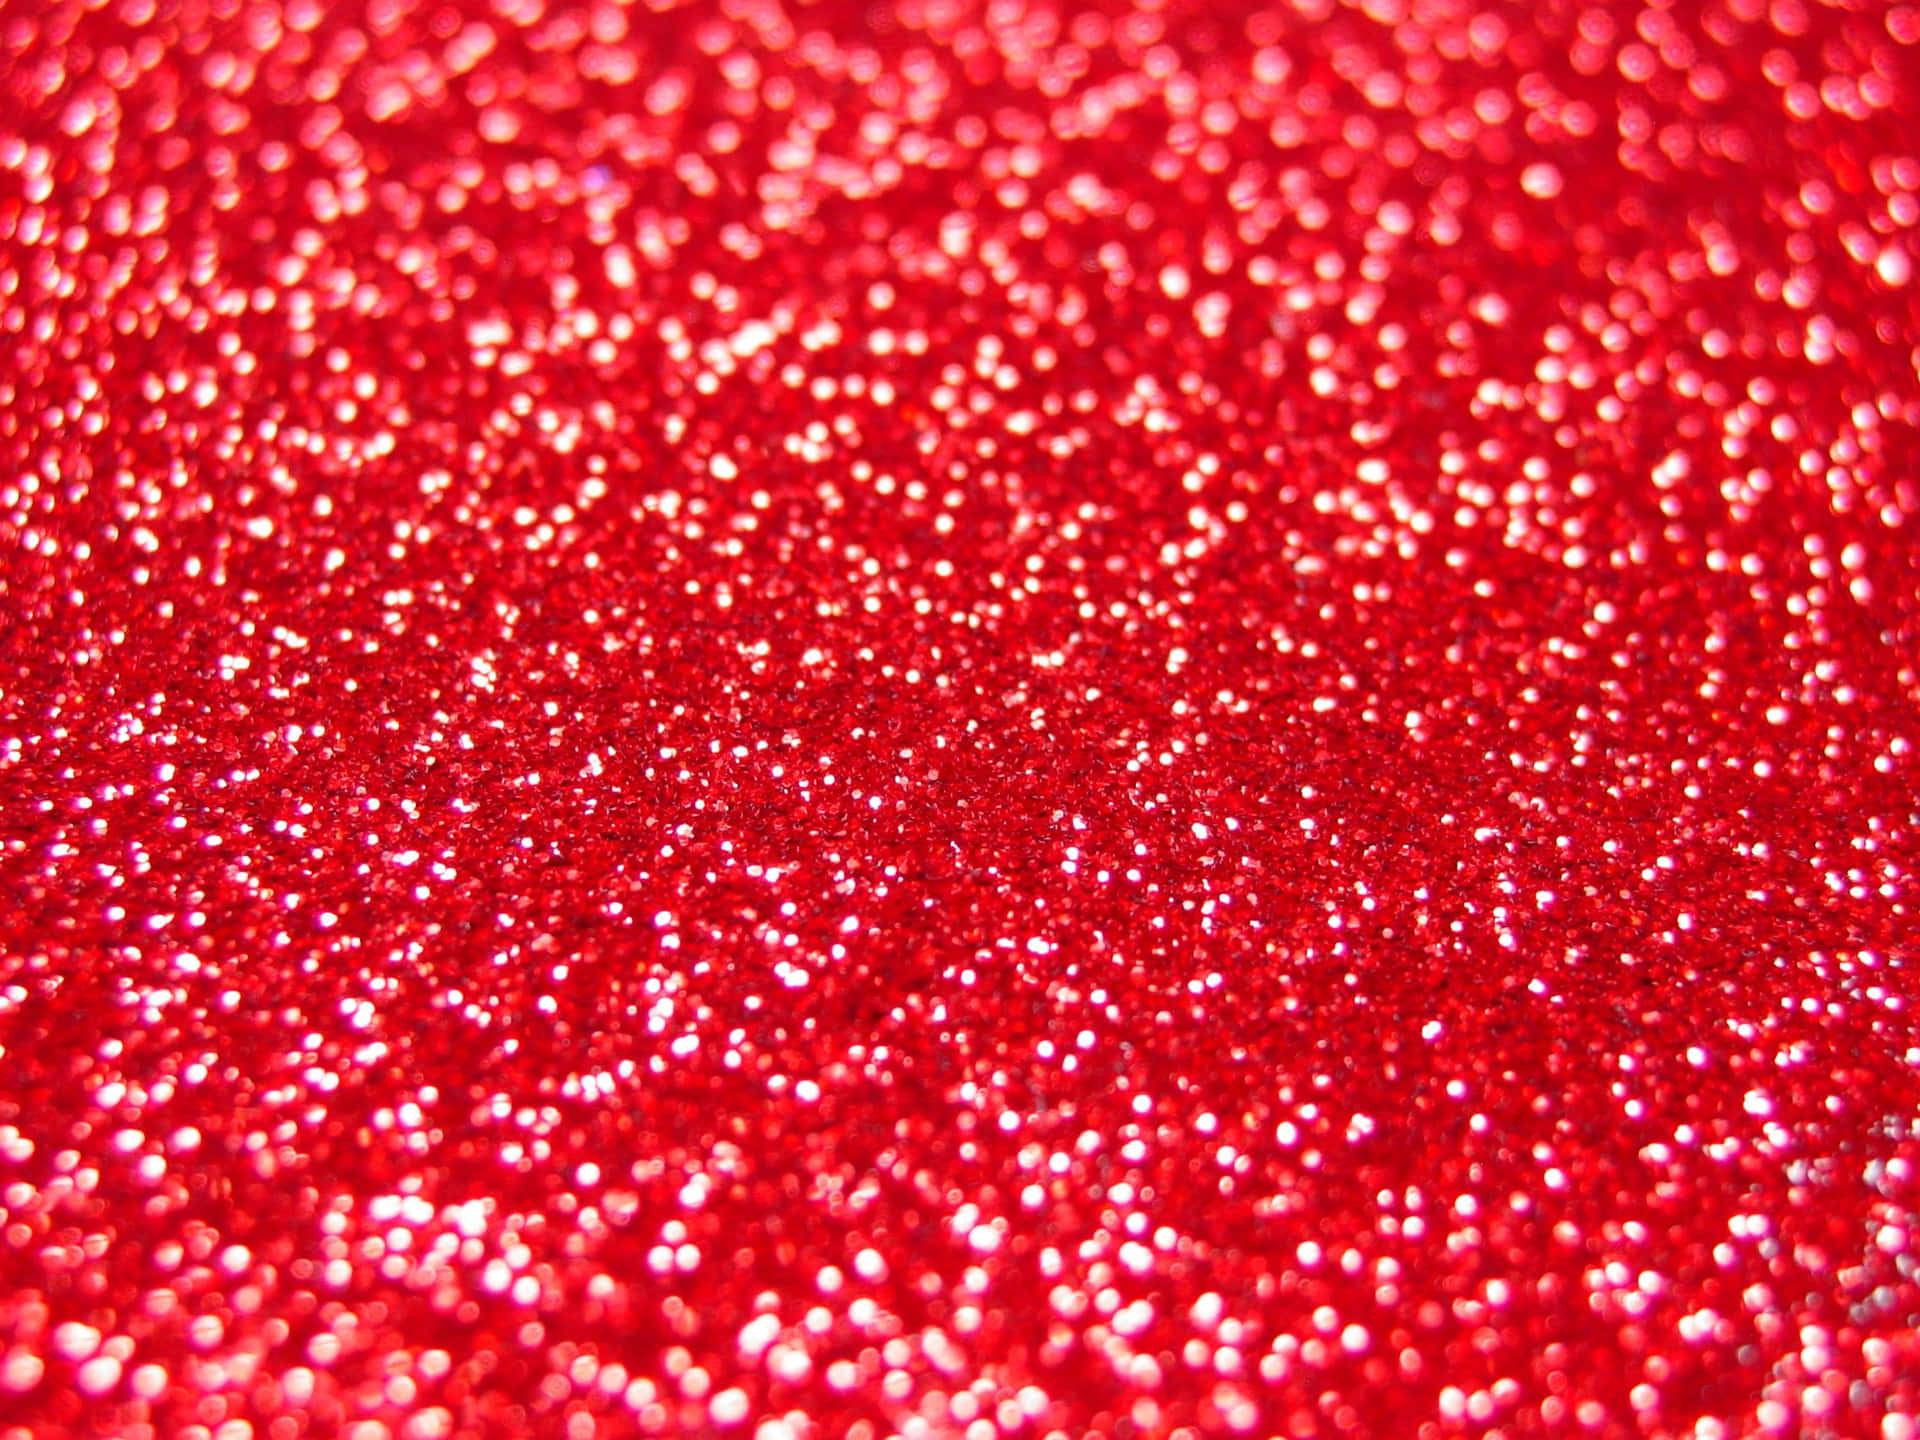 A bright and vibrant red glitter background.